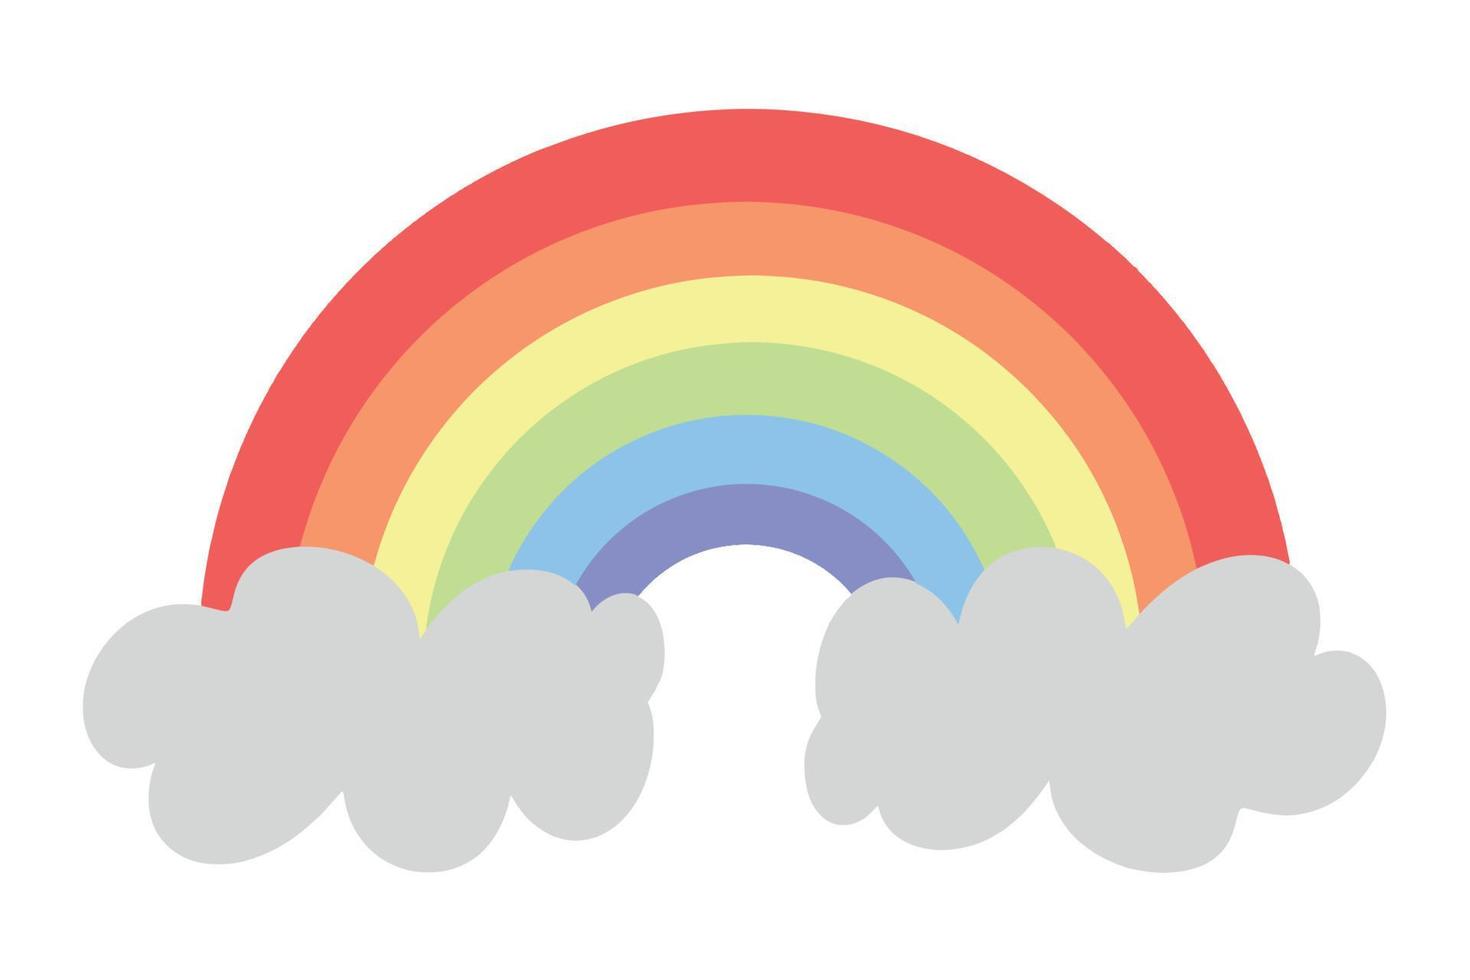 Colorful rainbow with white clouds. Rainbow vector icon on blue background.